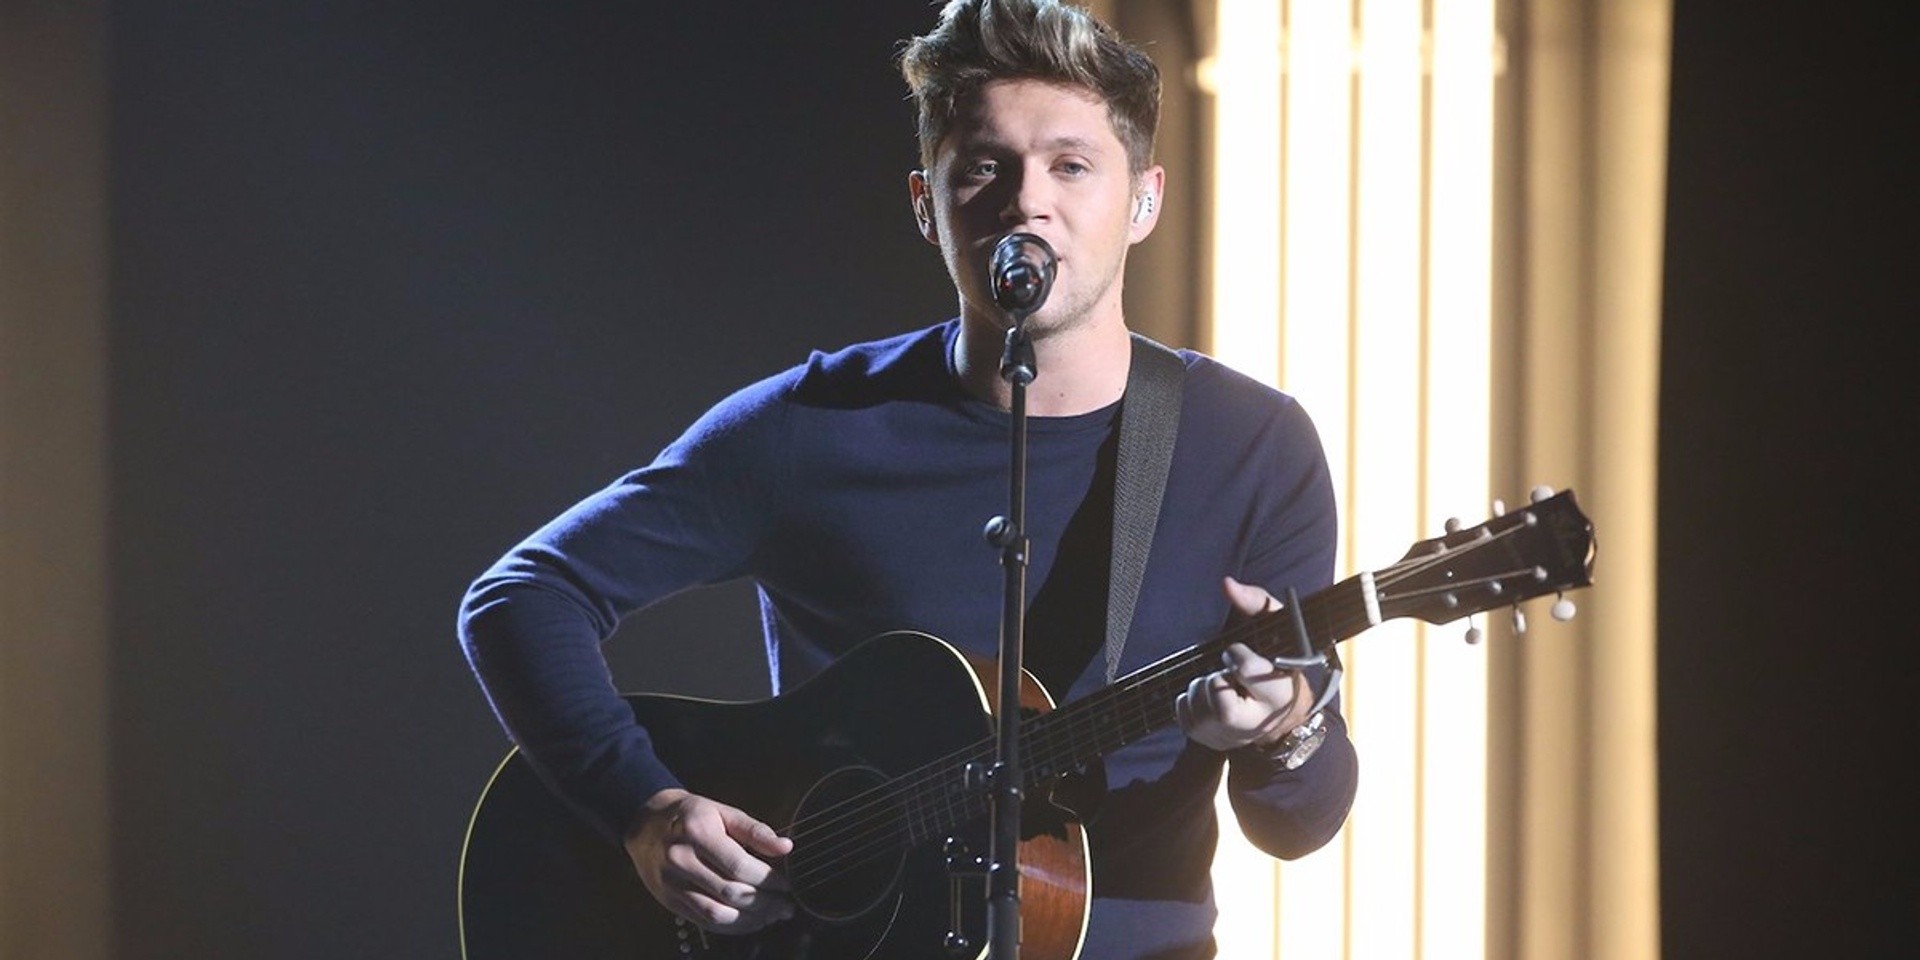 Niall Horan to perform in Asia next year — Manila, Singapore & Japan dates announced